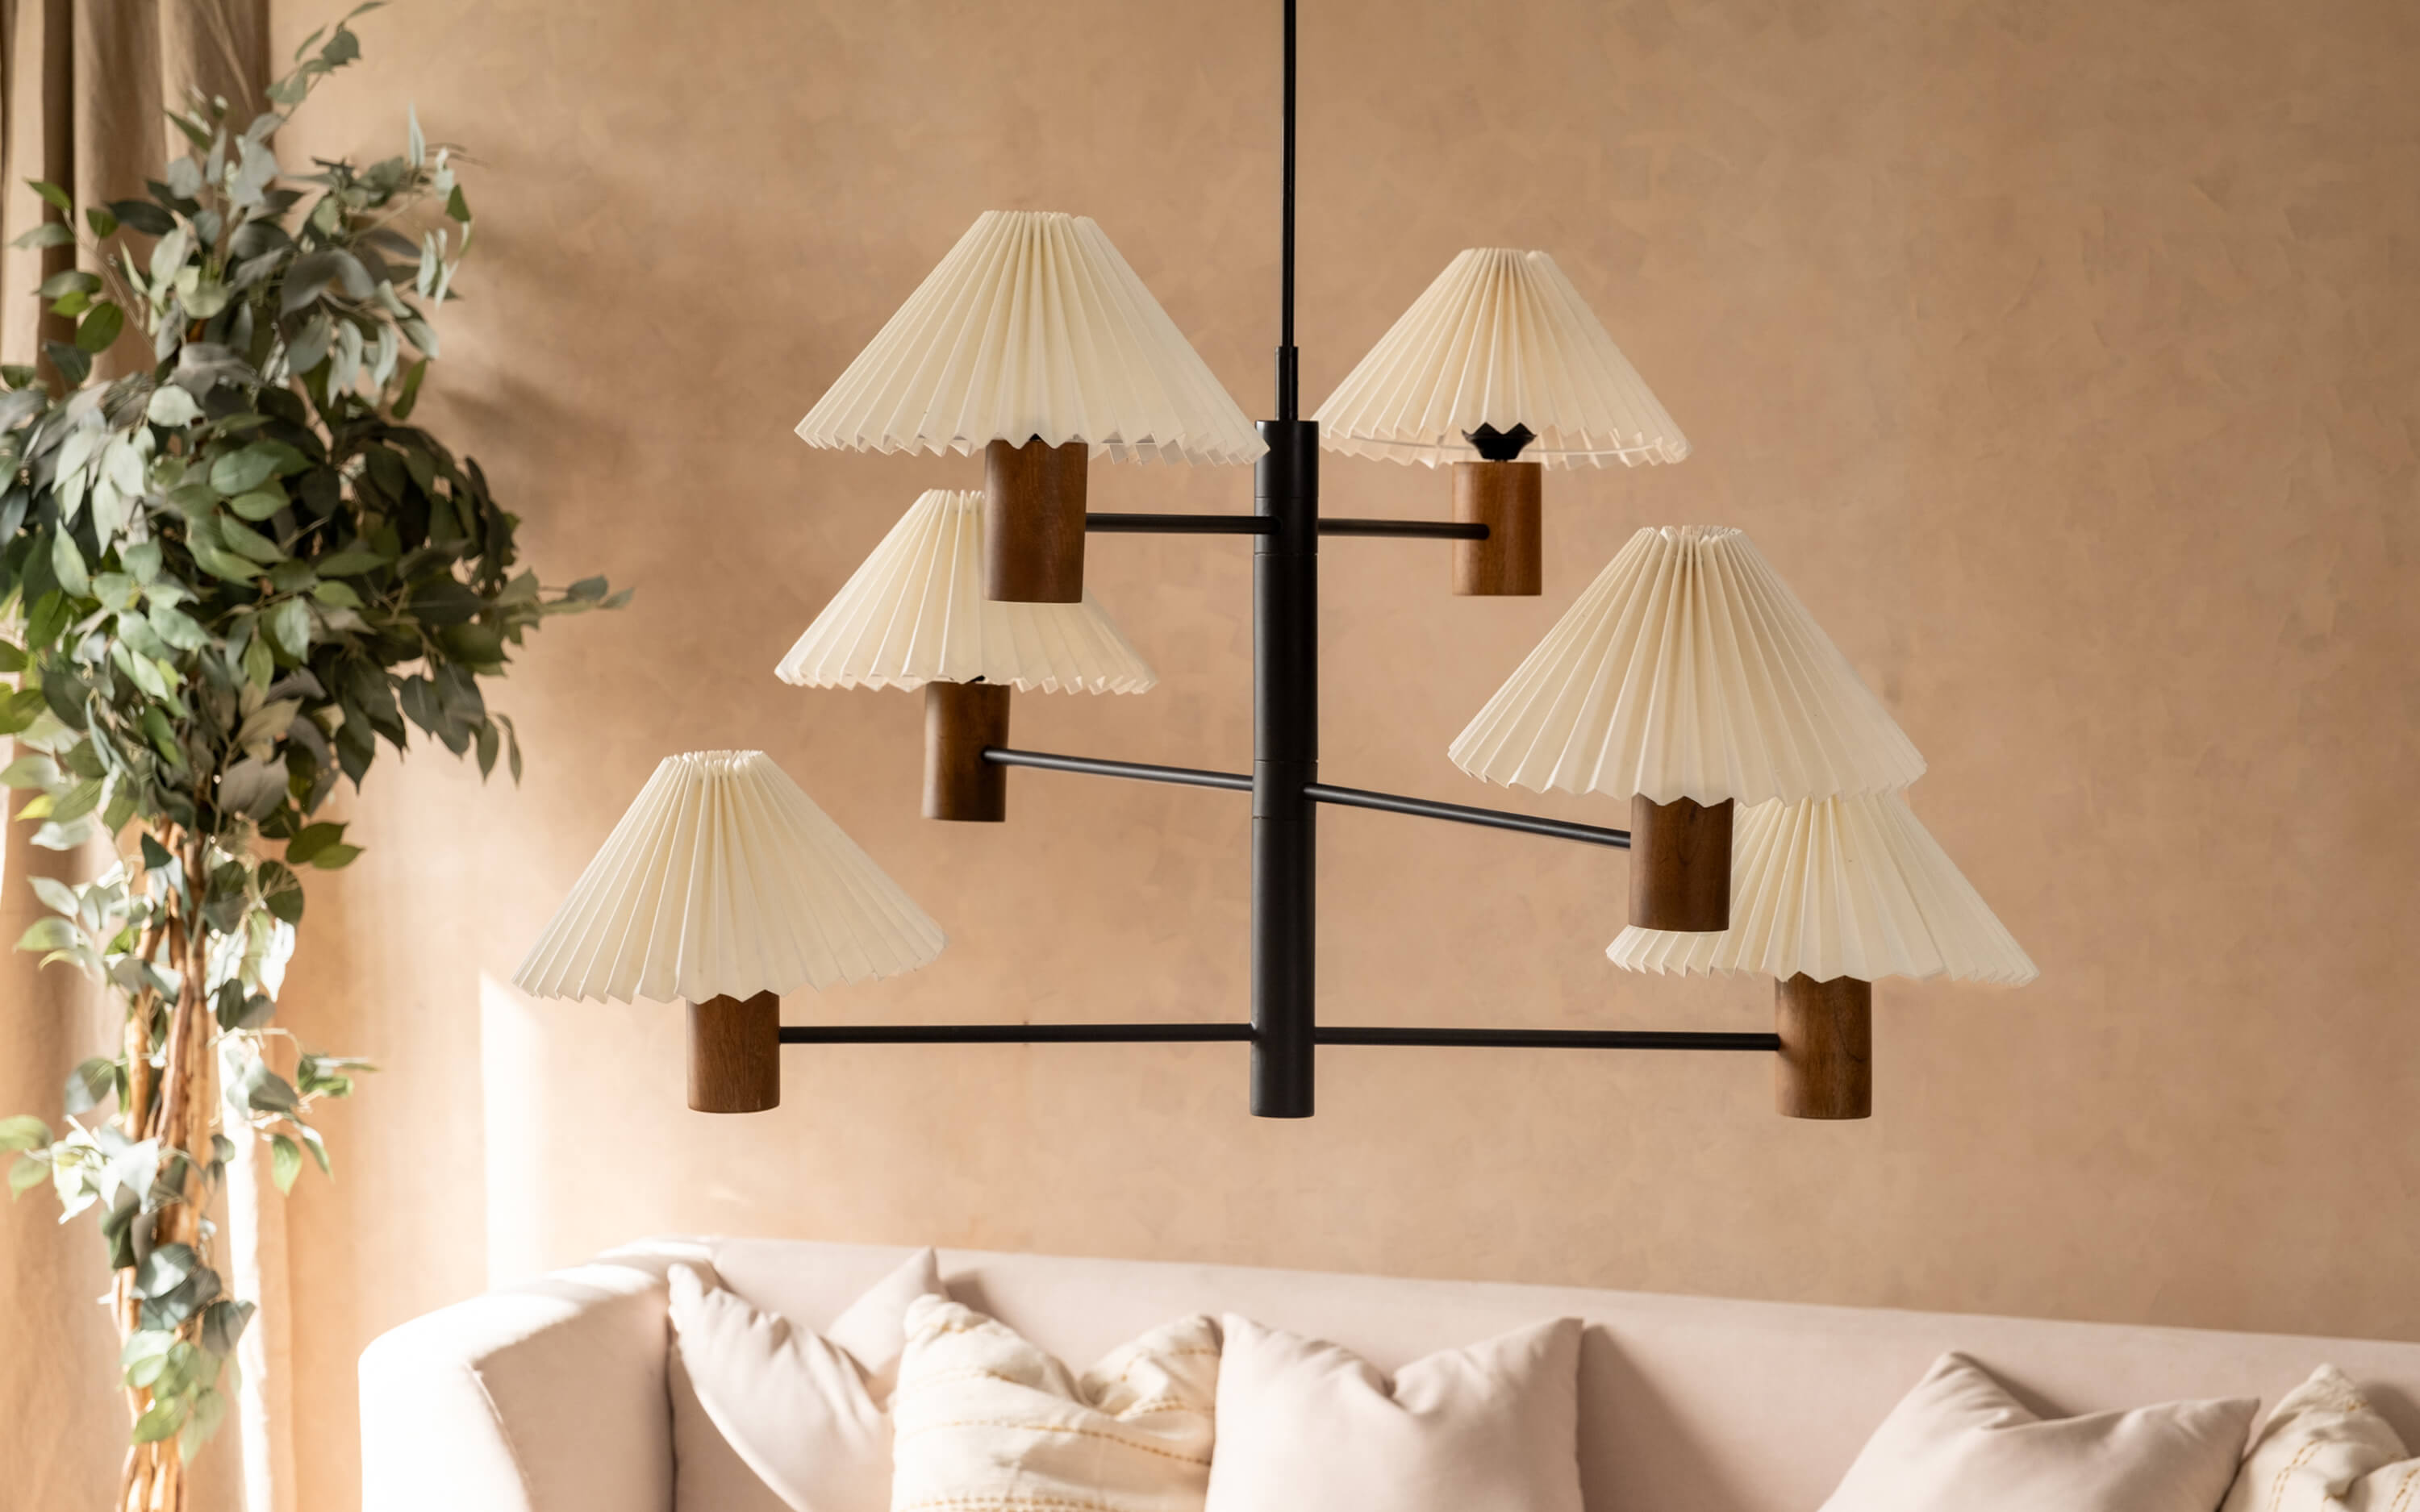 A chandelier with pleated shades and wooden details, exemplifying a mix of classic and modern styles for living room ambiance